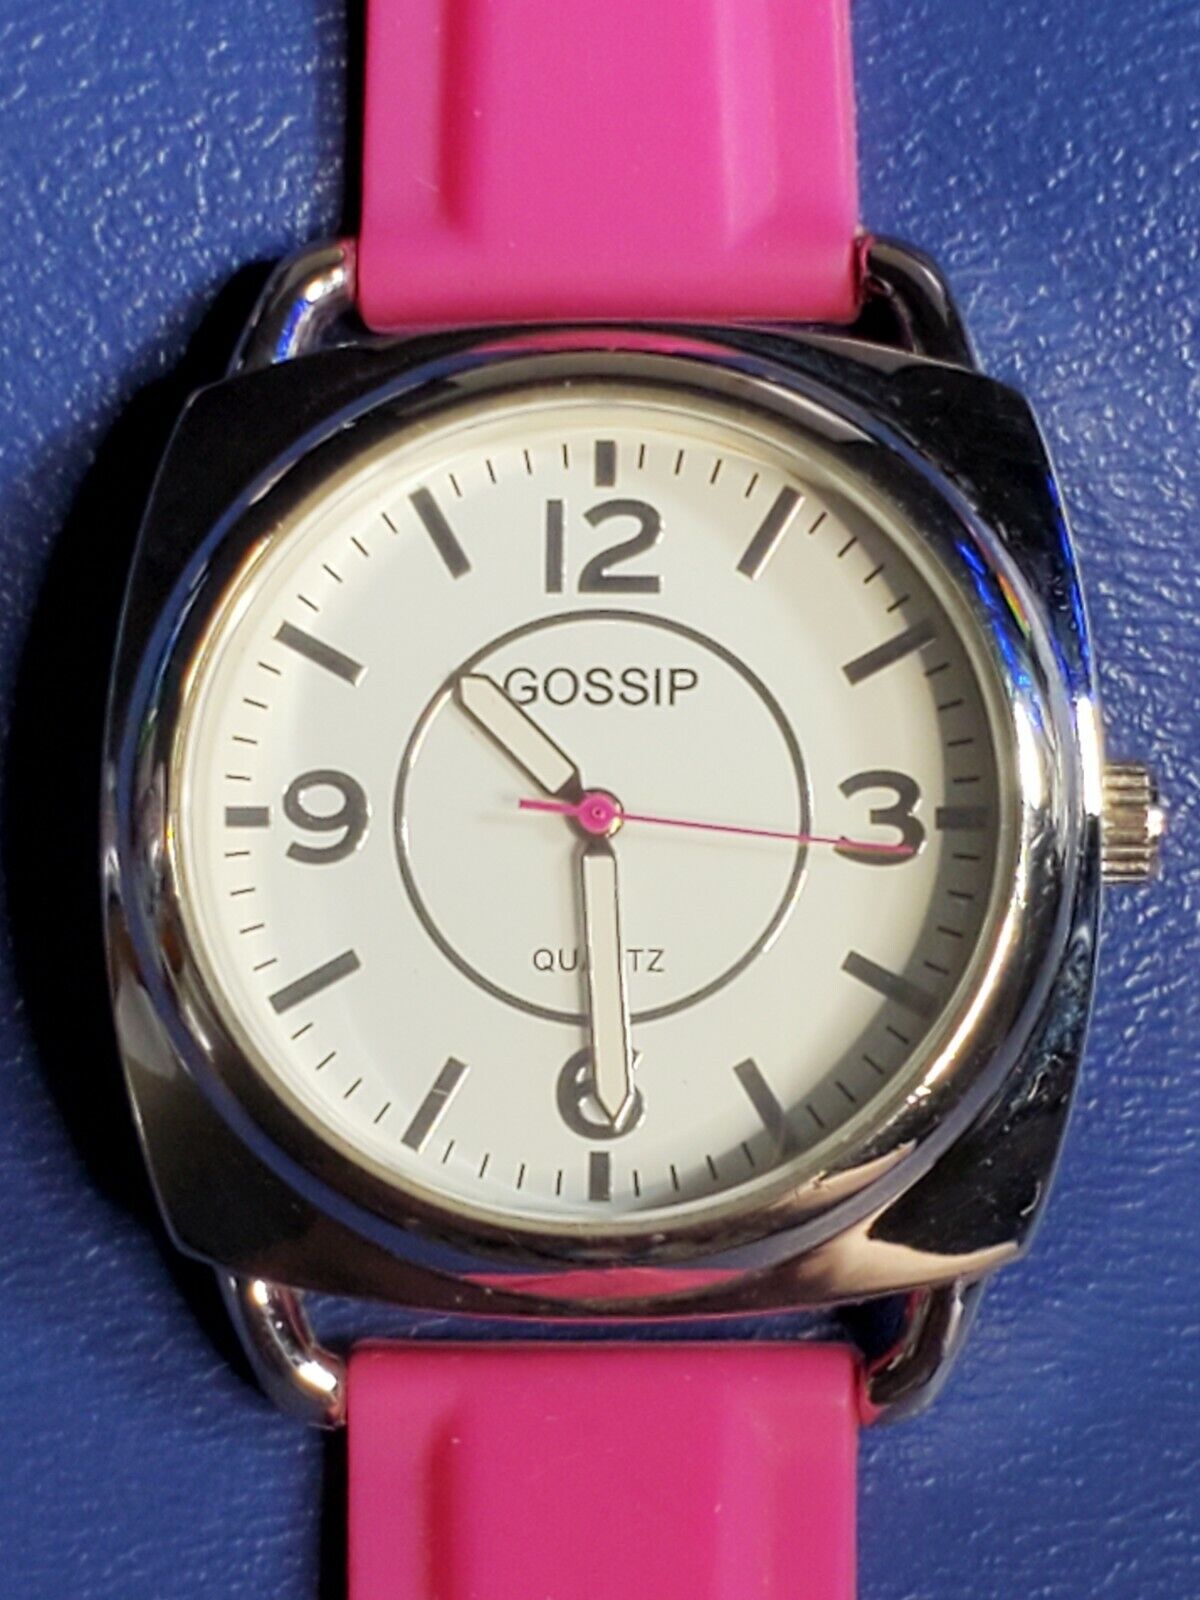 On-trend Gossip GSP899C Silver-tone Women's Quartz Watch with Pink Silicone Band